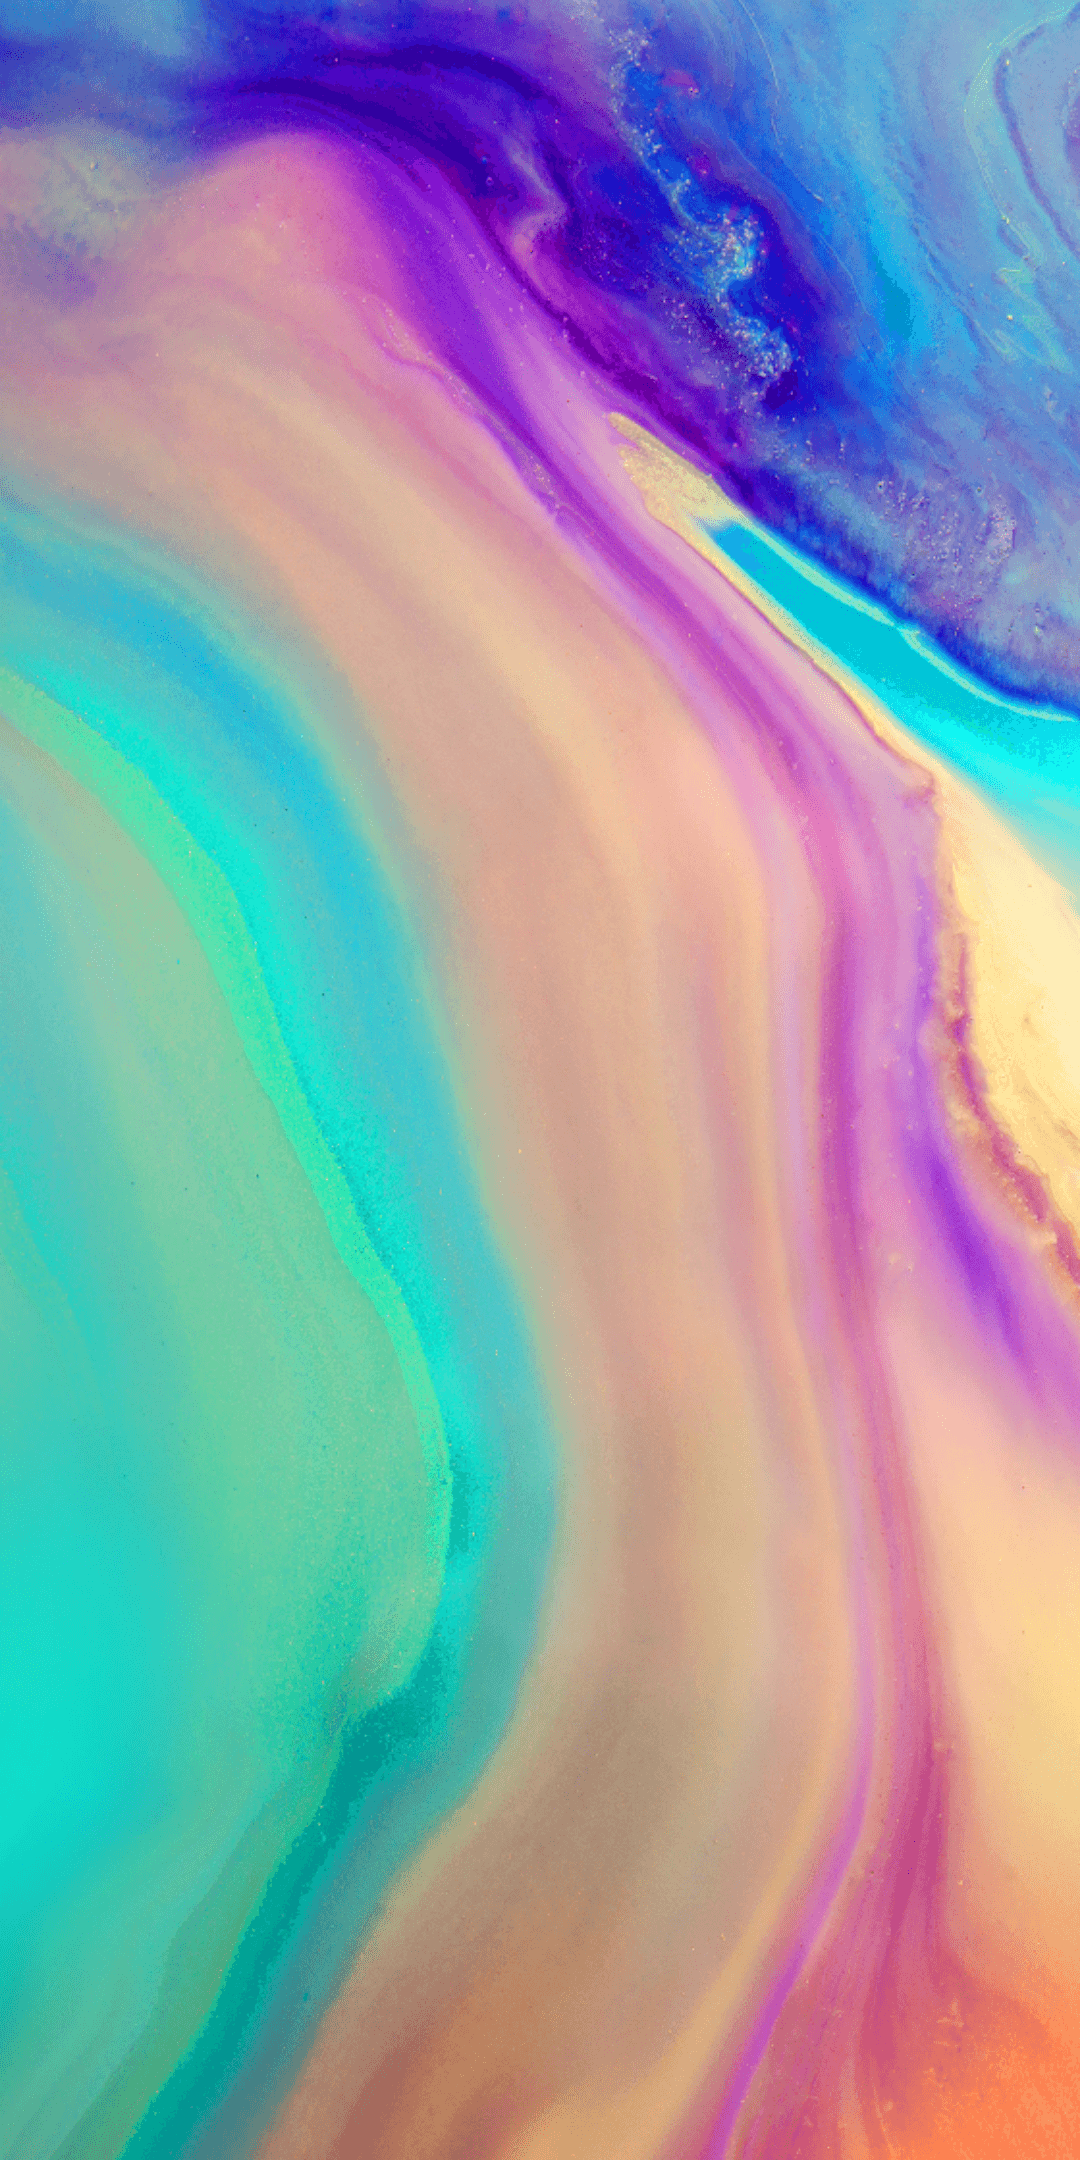 Get the Huawei P20 wallpaper in full resolution here